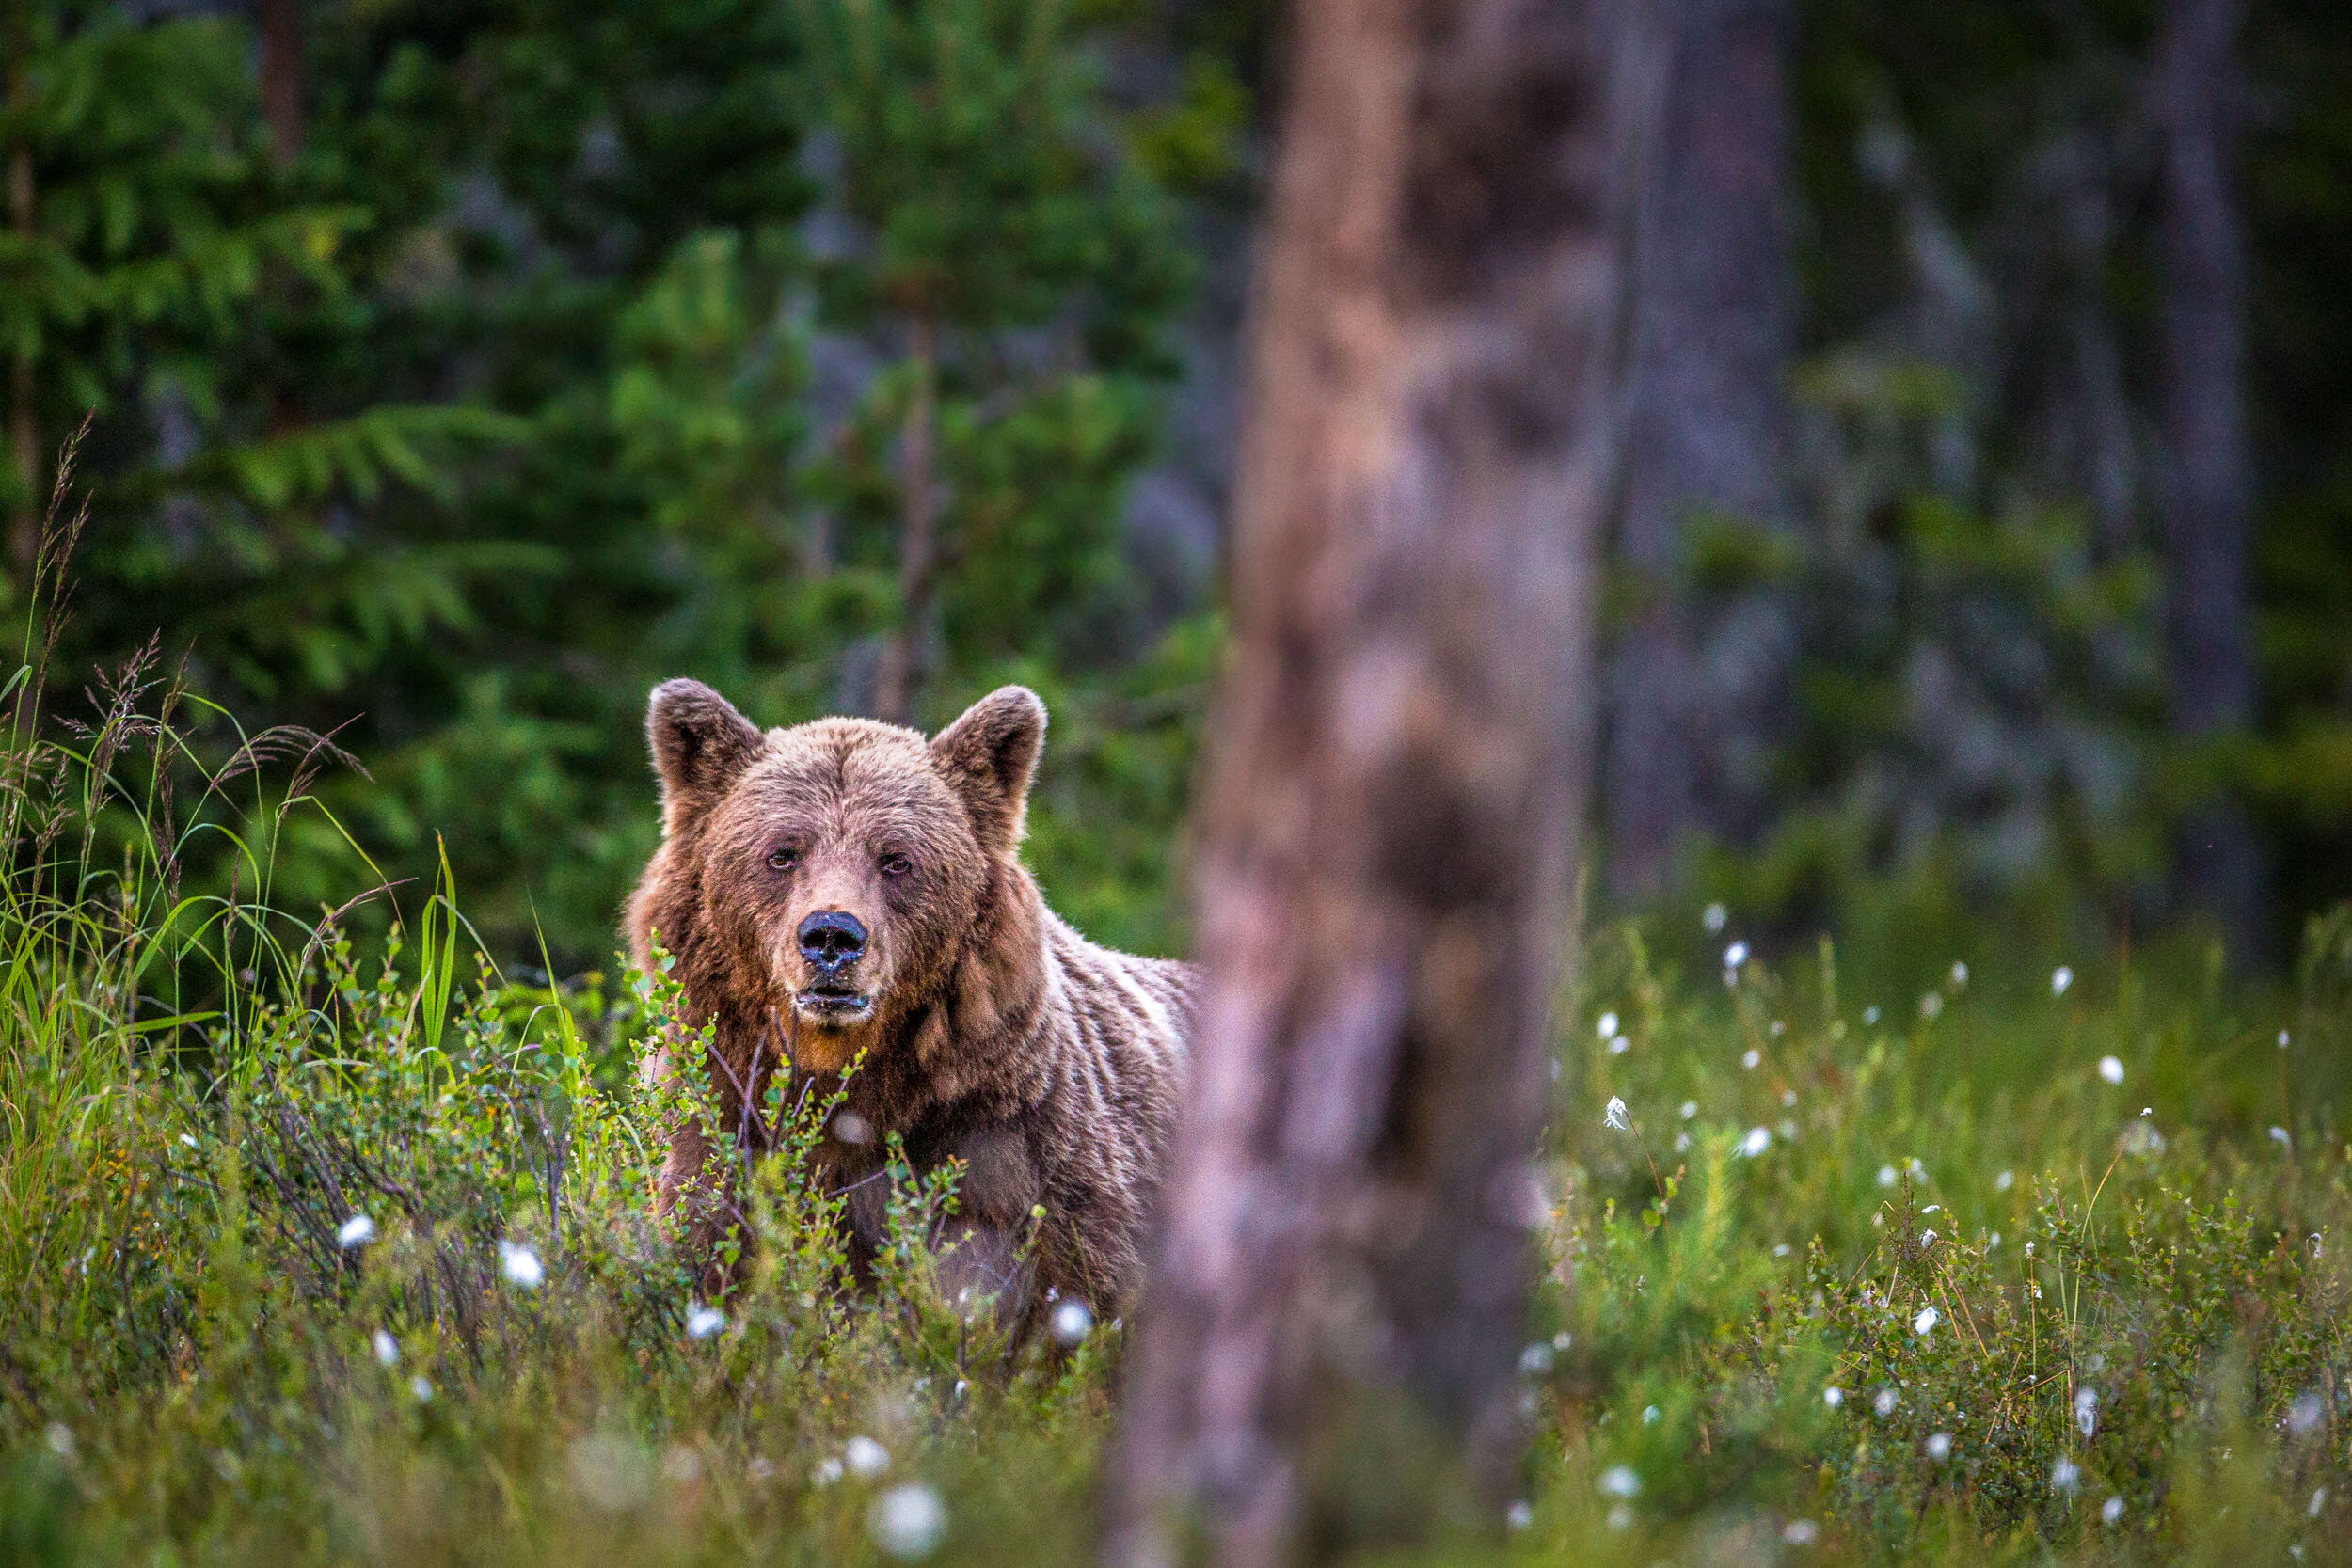 Bears are actually more dangerous than wolves, although it’s usually easy enough to avoid contact.